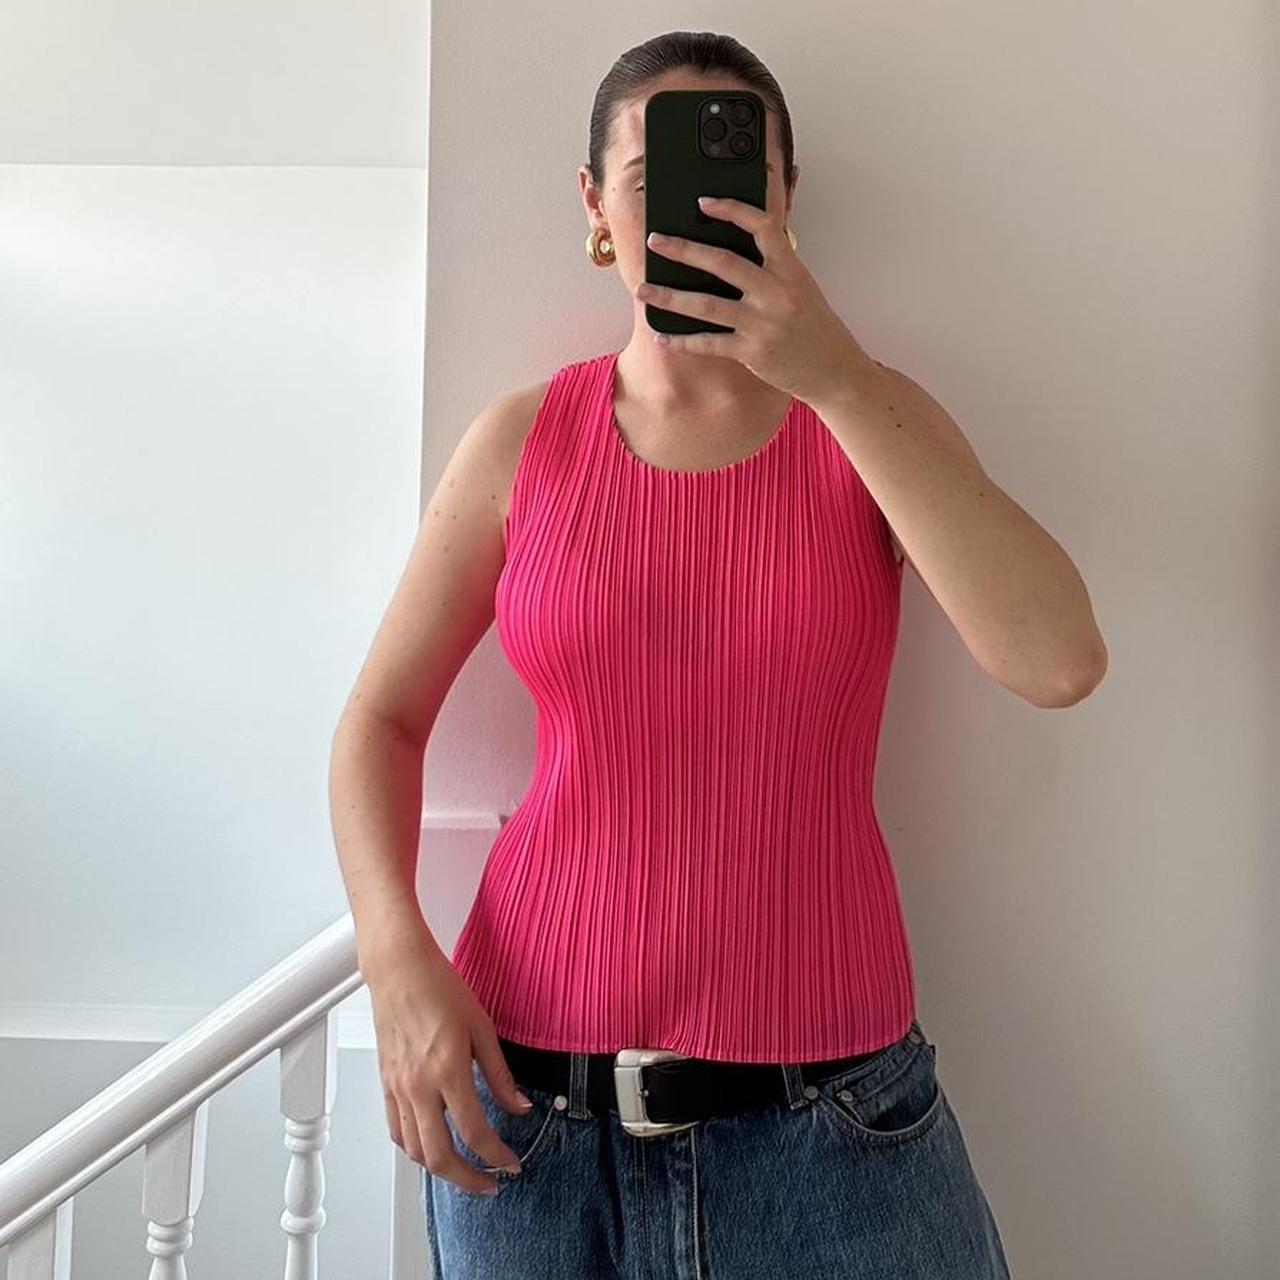 Issey Miyake pleats Top In pink , Size 3 which I... - Depop